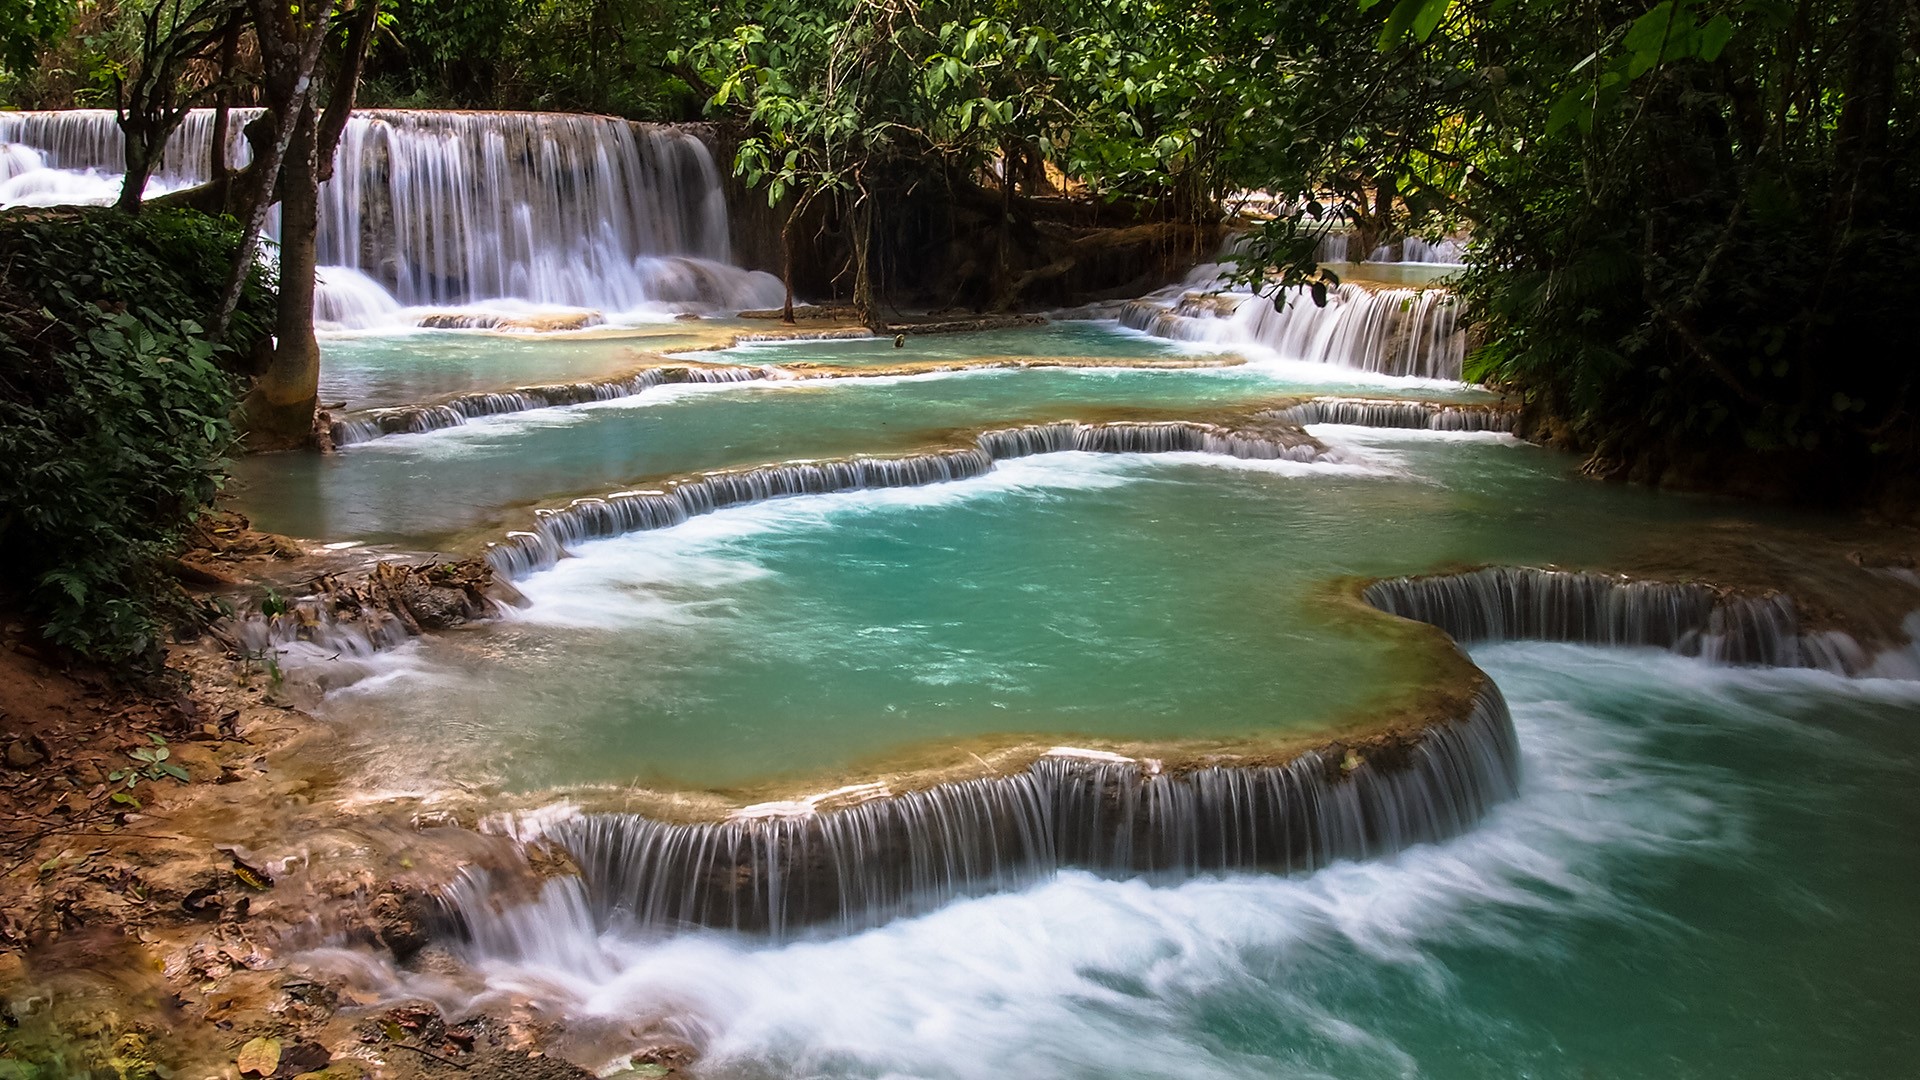 General 1920x1080 nature landscape trees plants water waterfall tropical forest long exposure leaves forest Monsoon Laos